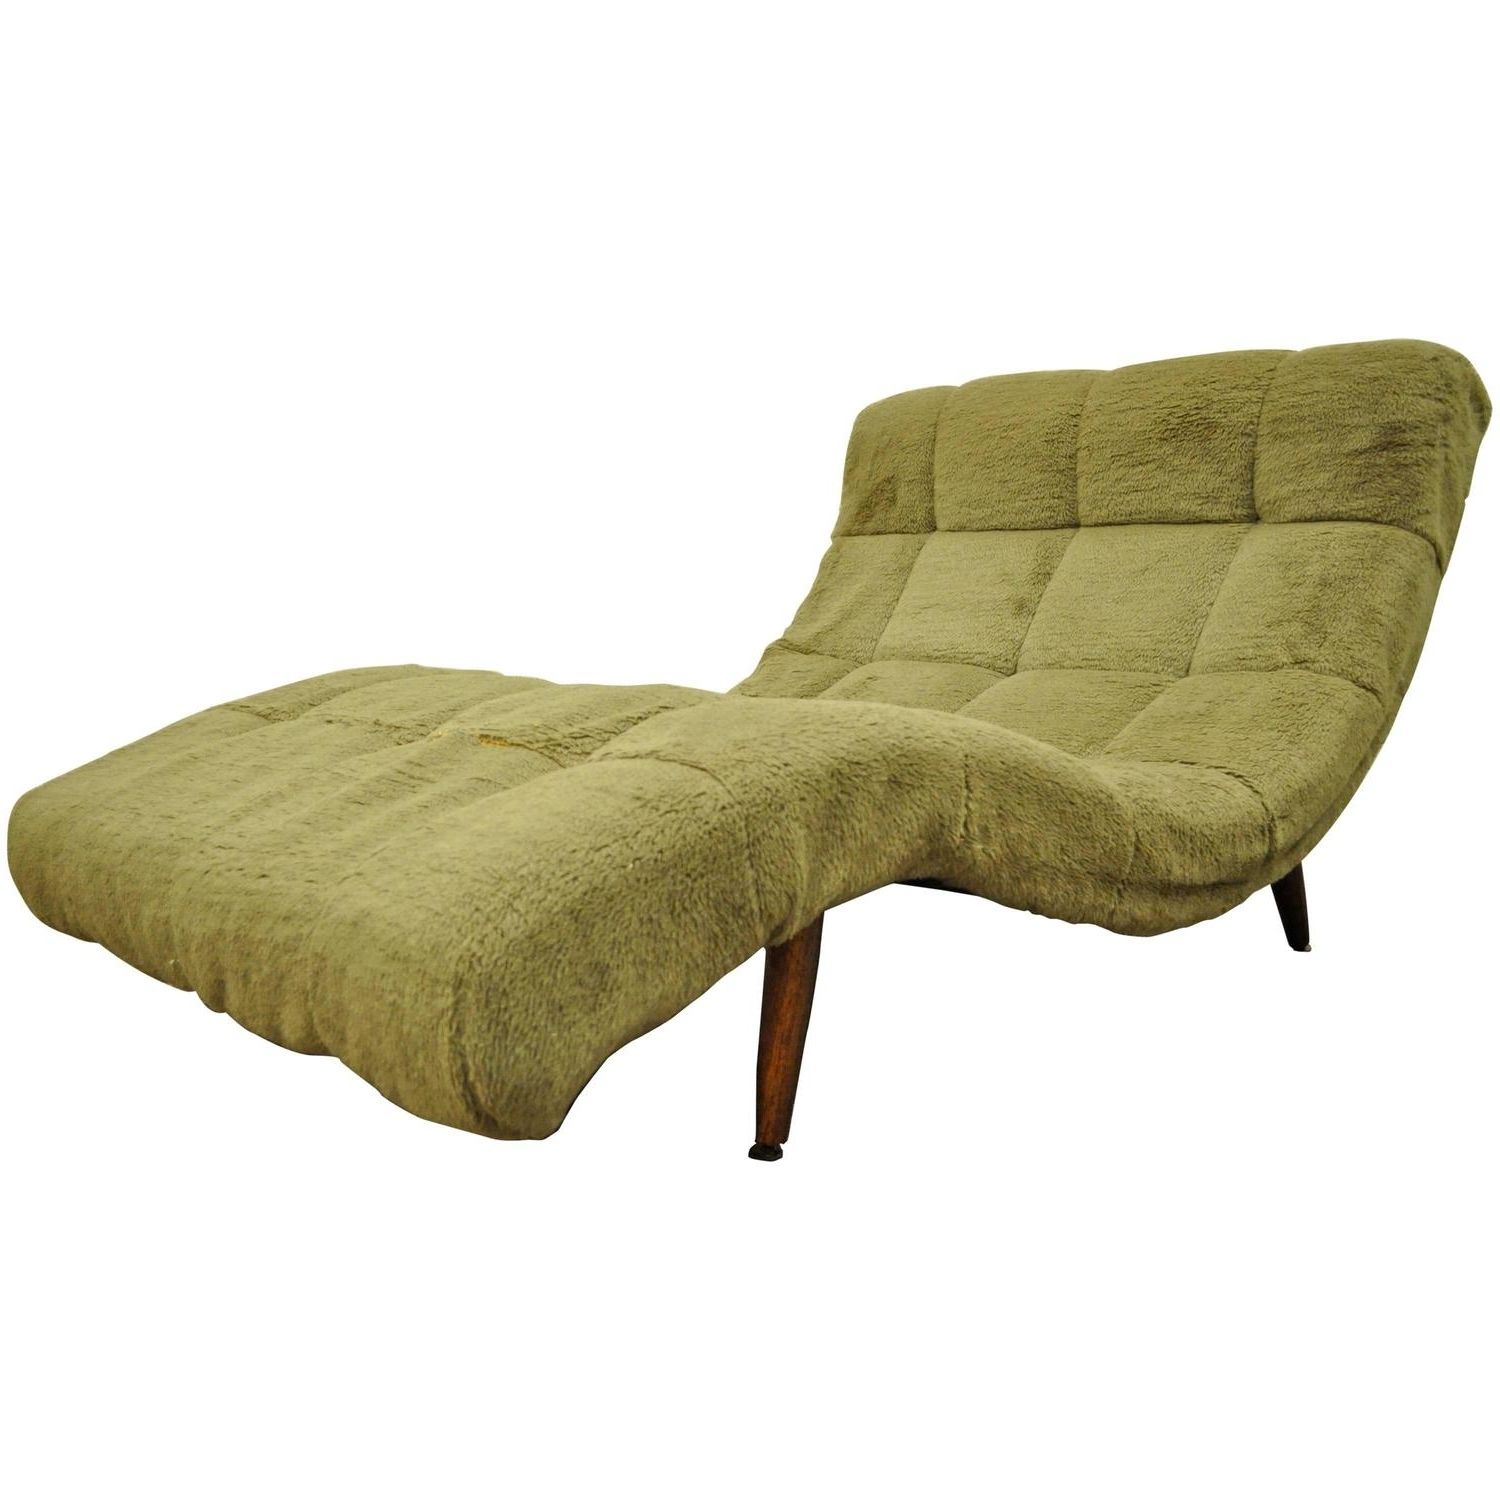 Midcentury Modern Double Wide Wave Chaise Lounge In The Style Of With Regard To Newest Green Chaise Lounge Chairs (View 7 of 15)